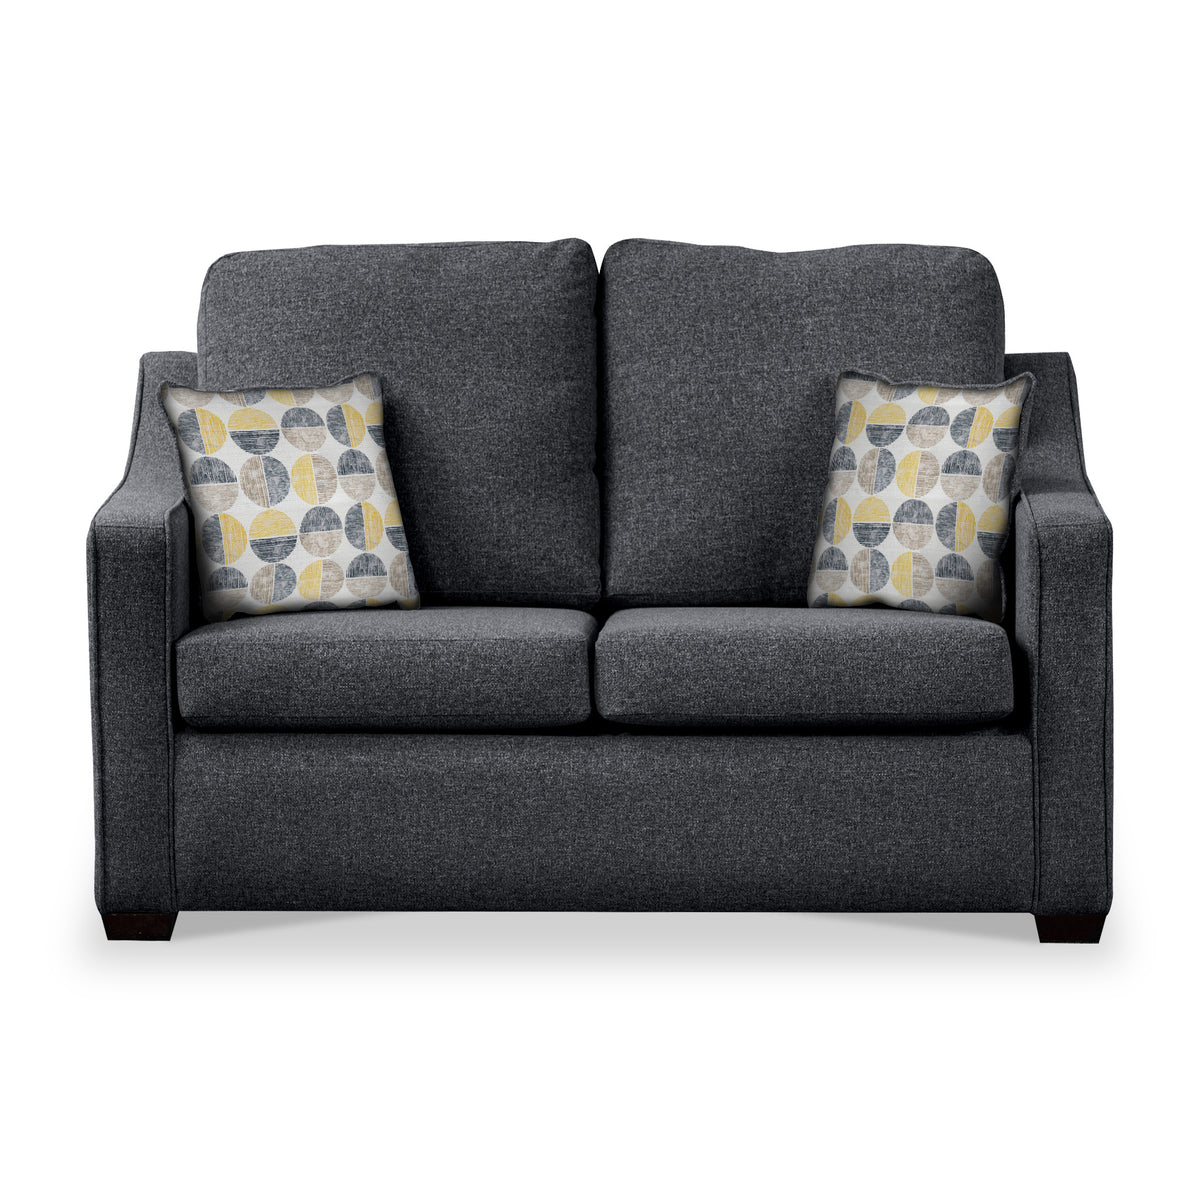 Charlcote Charcoal Faux Linen 2 Seater Sofabed with Beige Scatter Cushions from Roseland Furniture